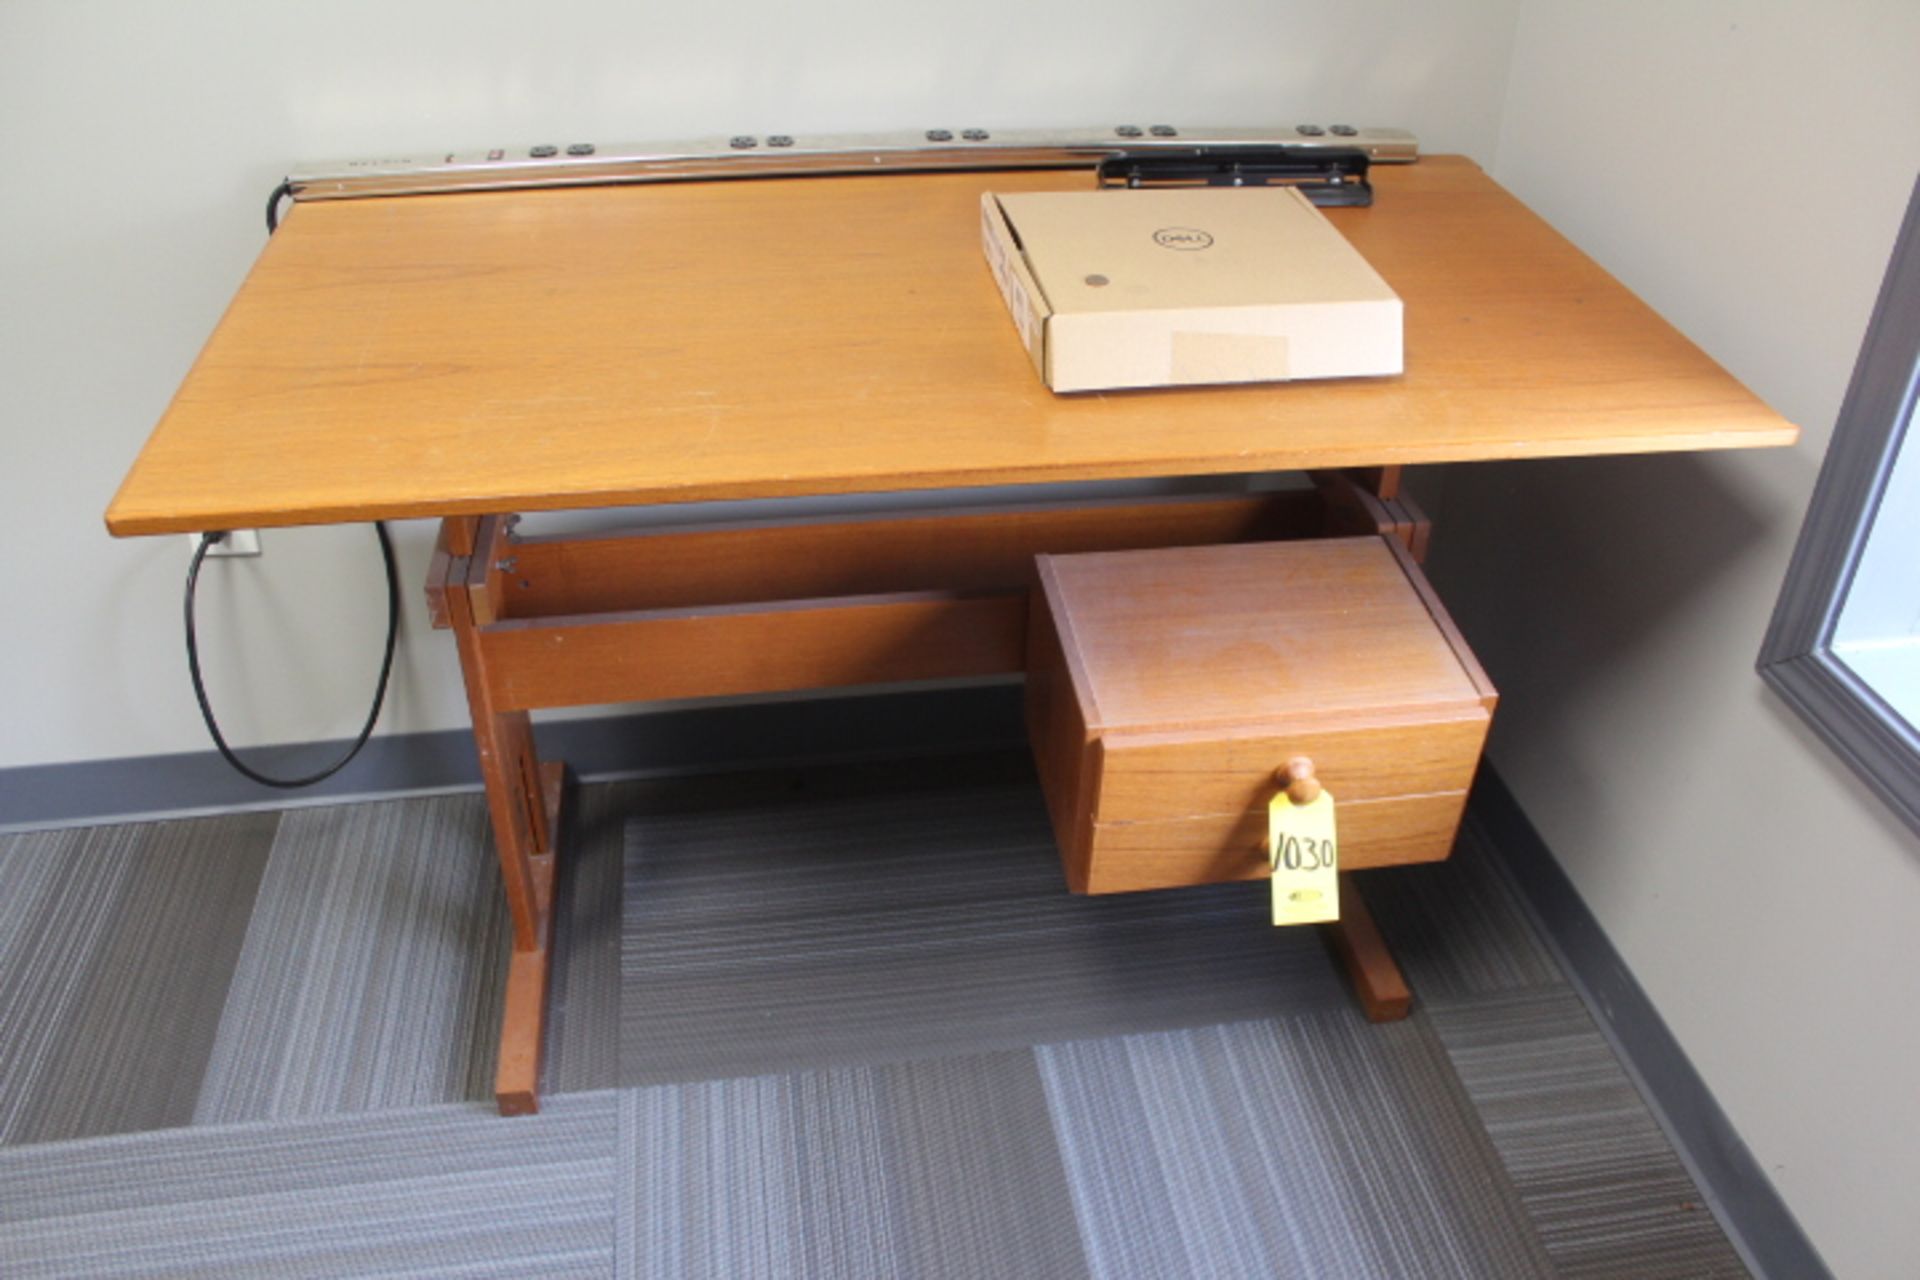 27 IN. X 51 IN. WOOD DRAFTING TABLE WITH DRAWER AND POWER STRIP